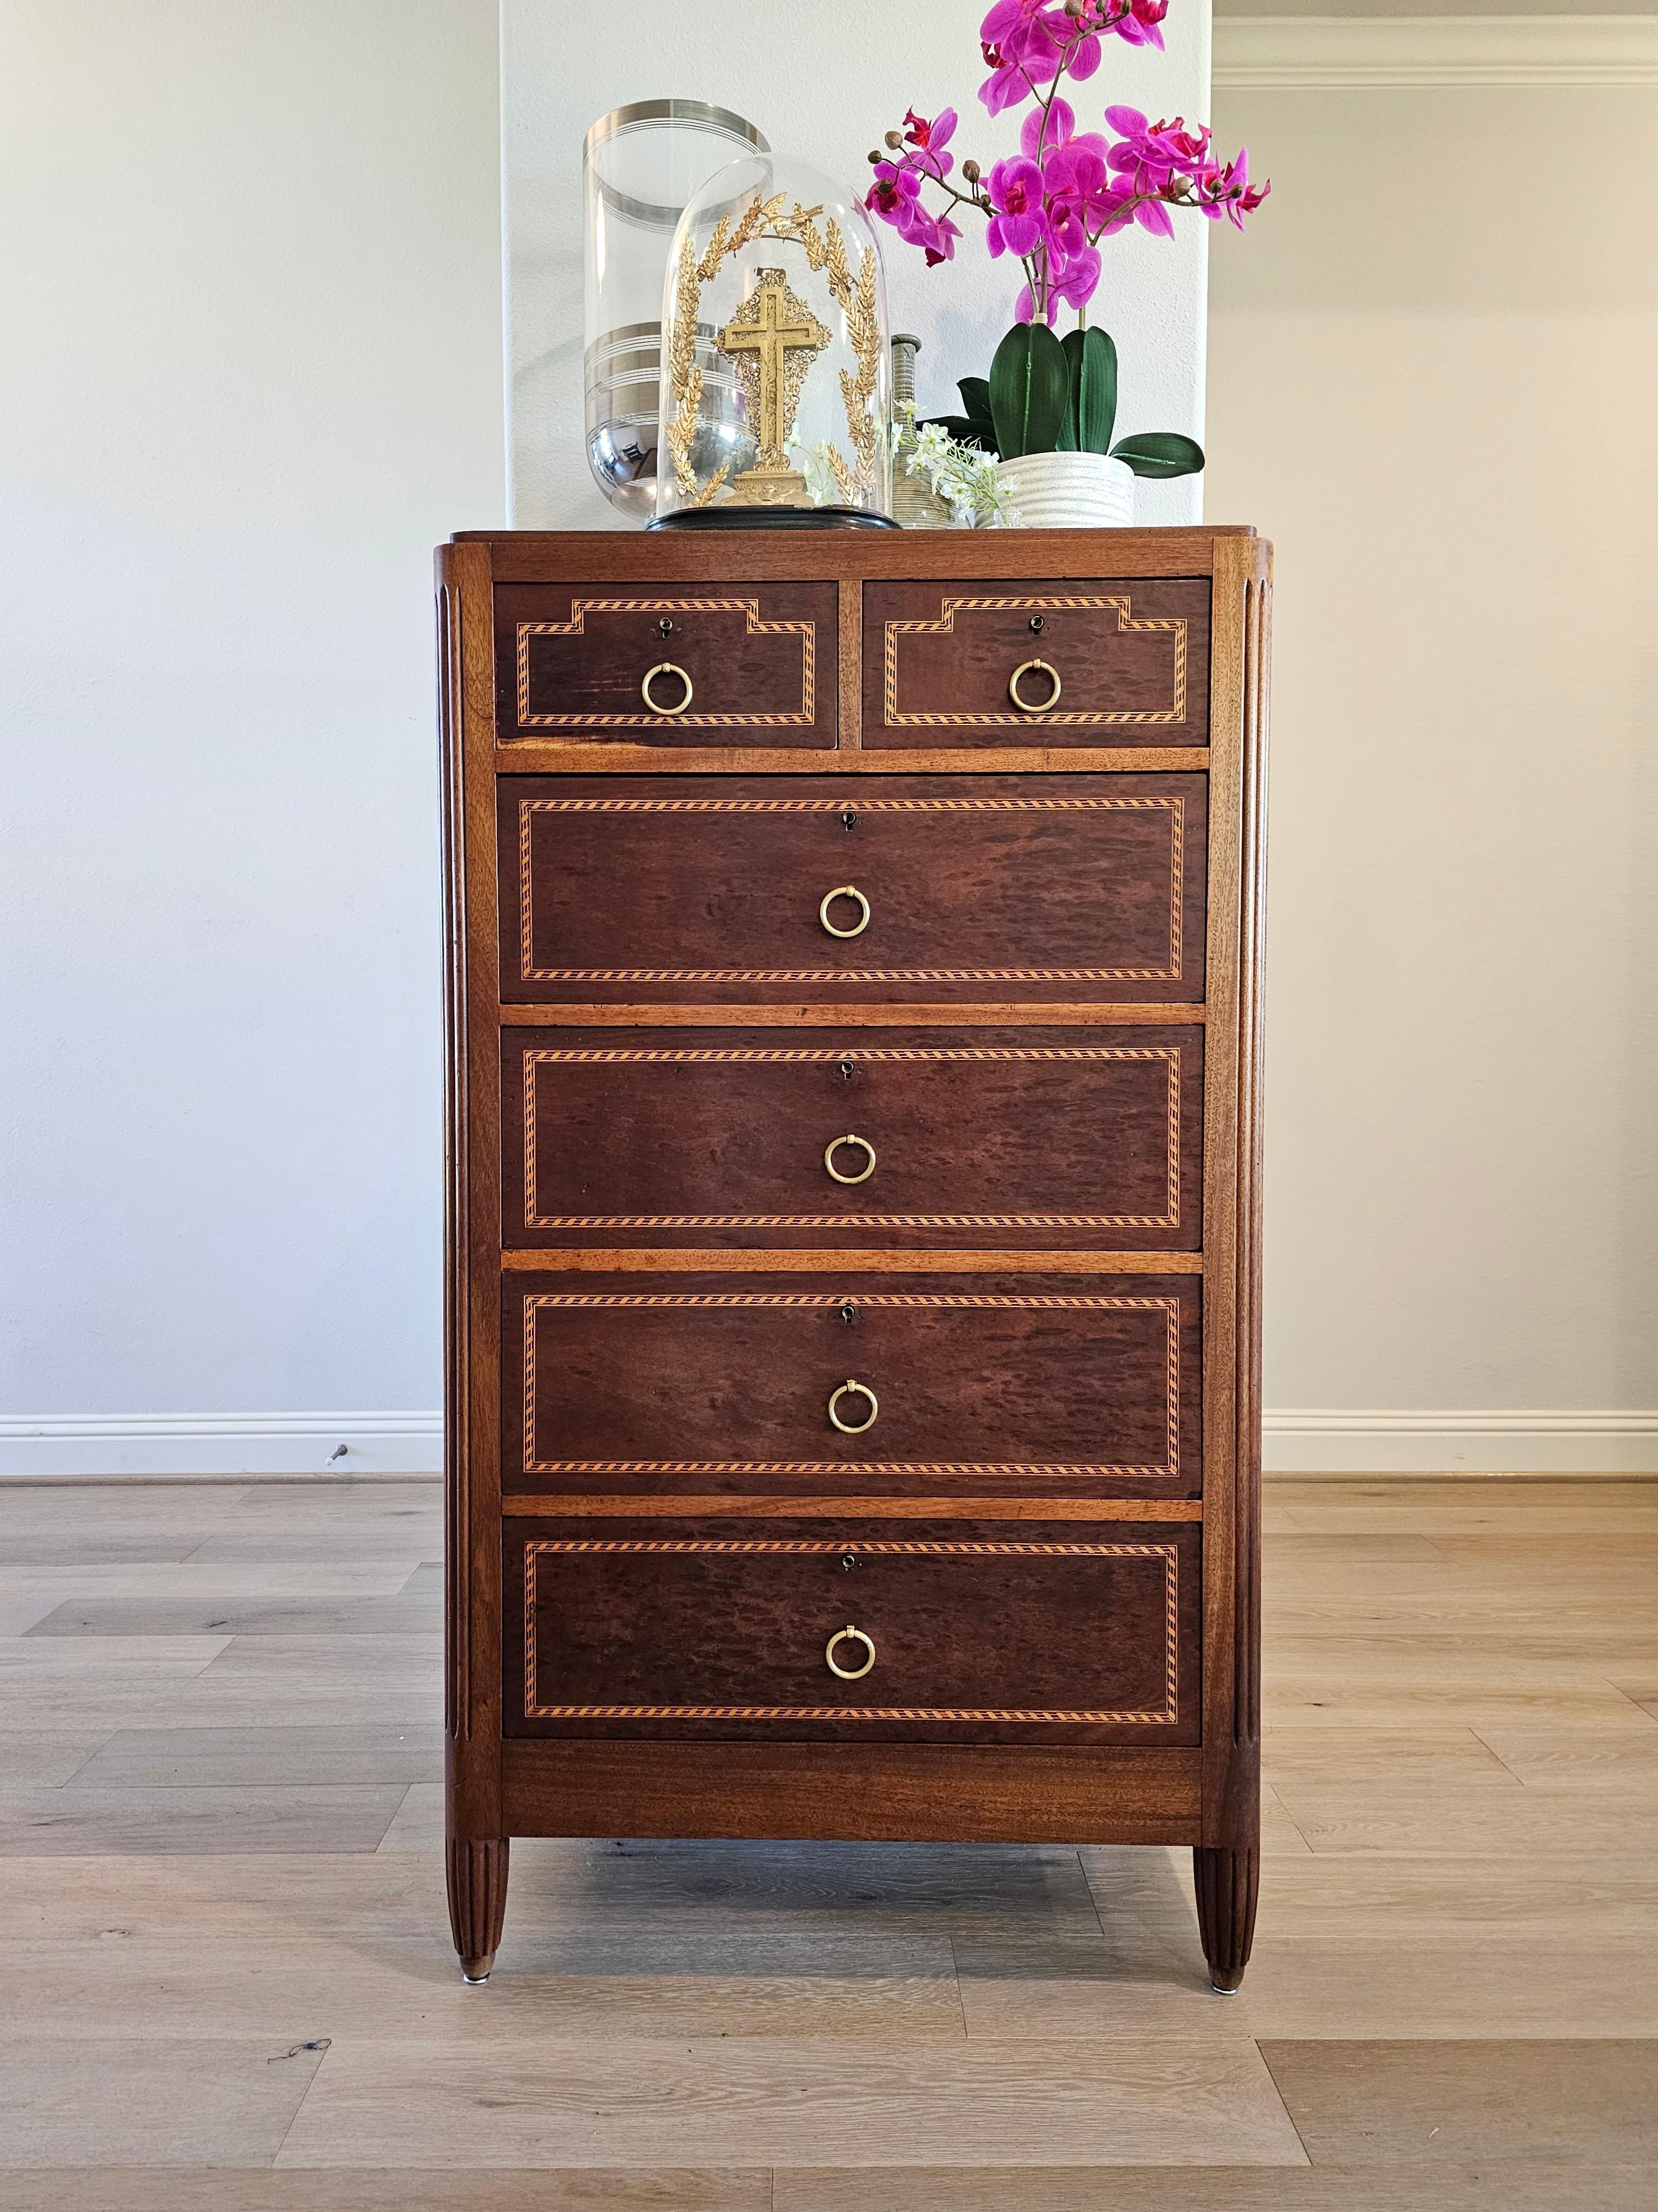 Rare French Art Deco Signed Mercier & Francisque Chaleyssin Chest of Drawers  For Sale 14